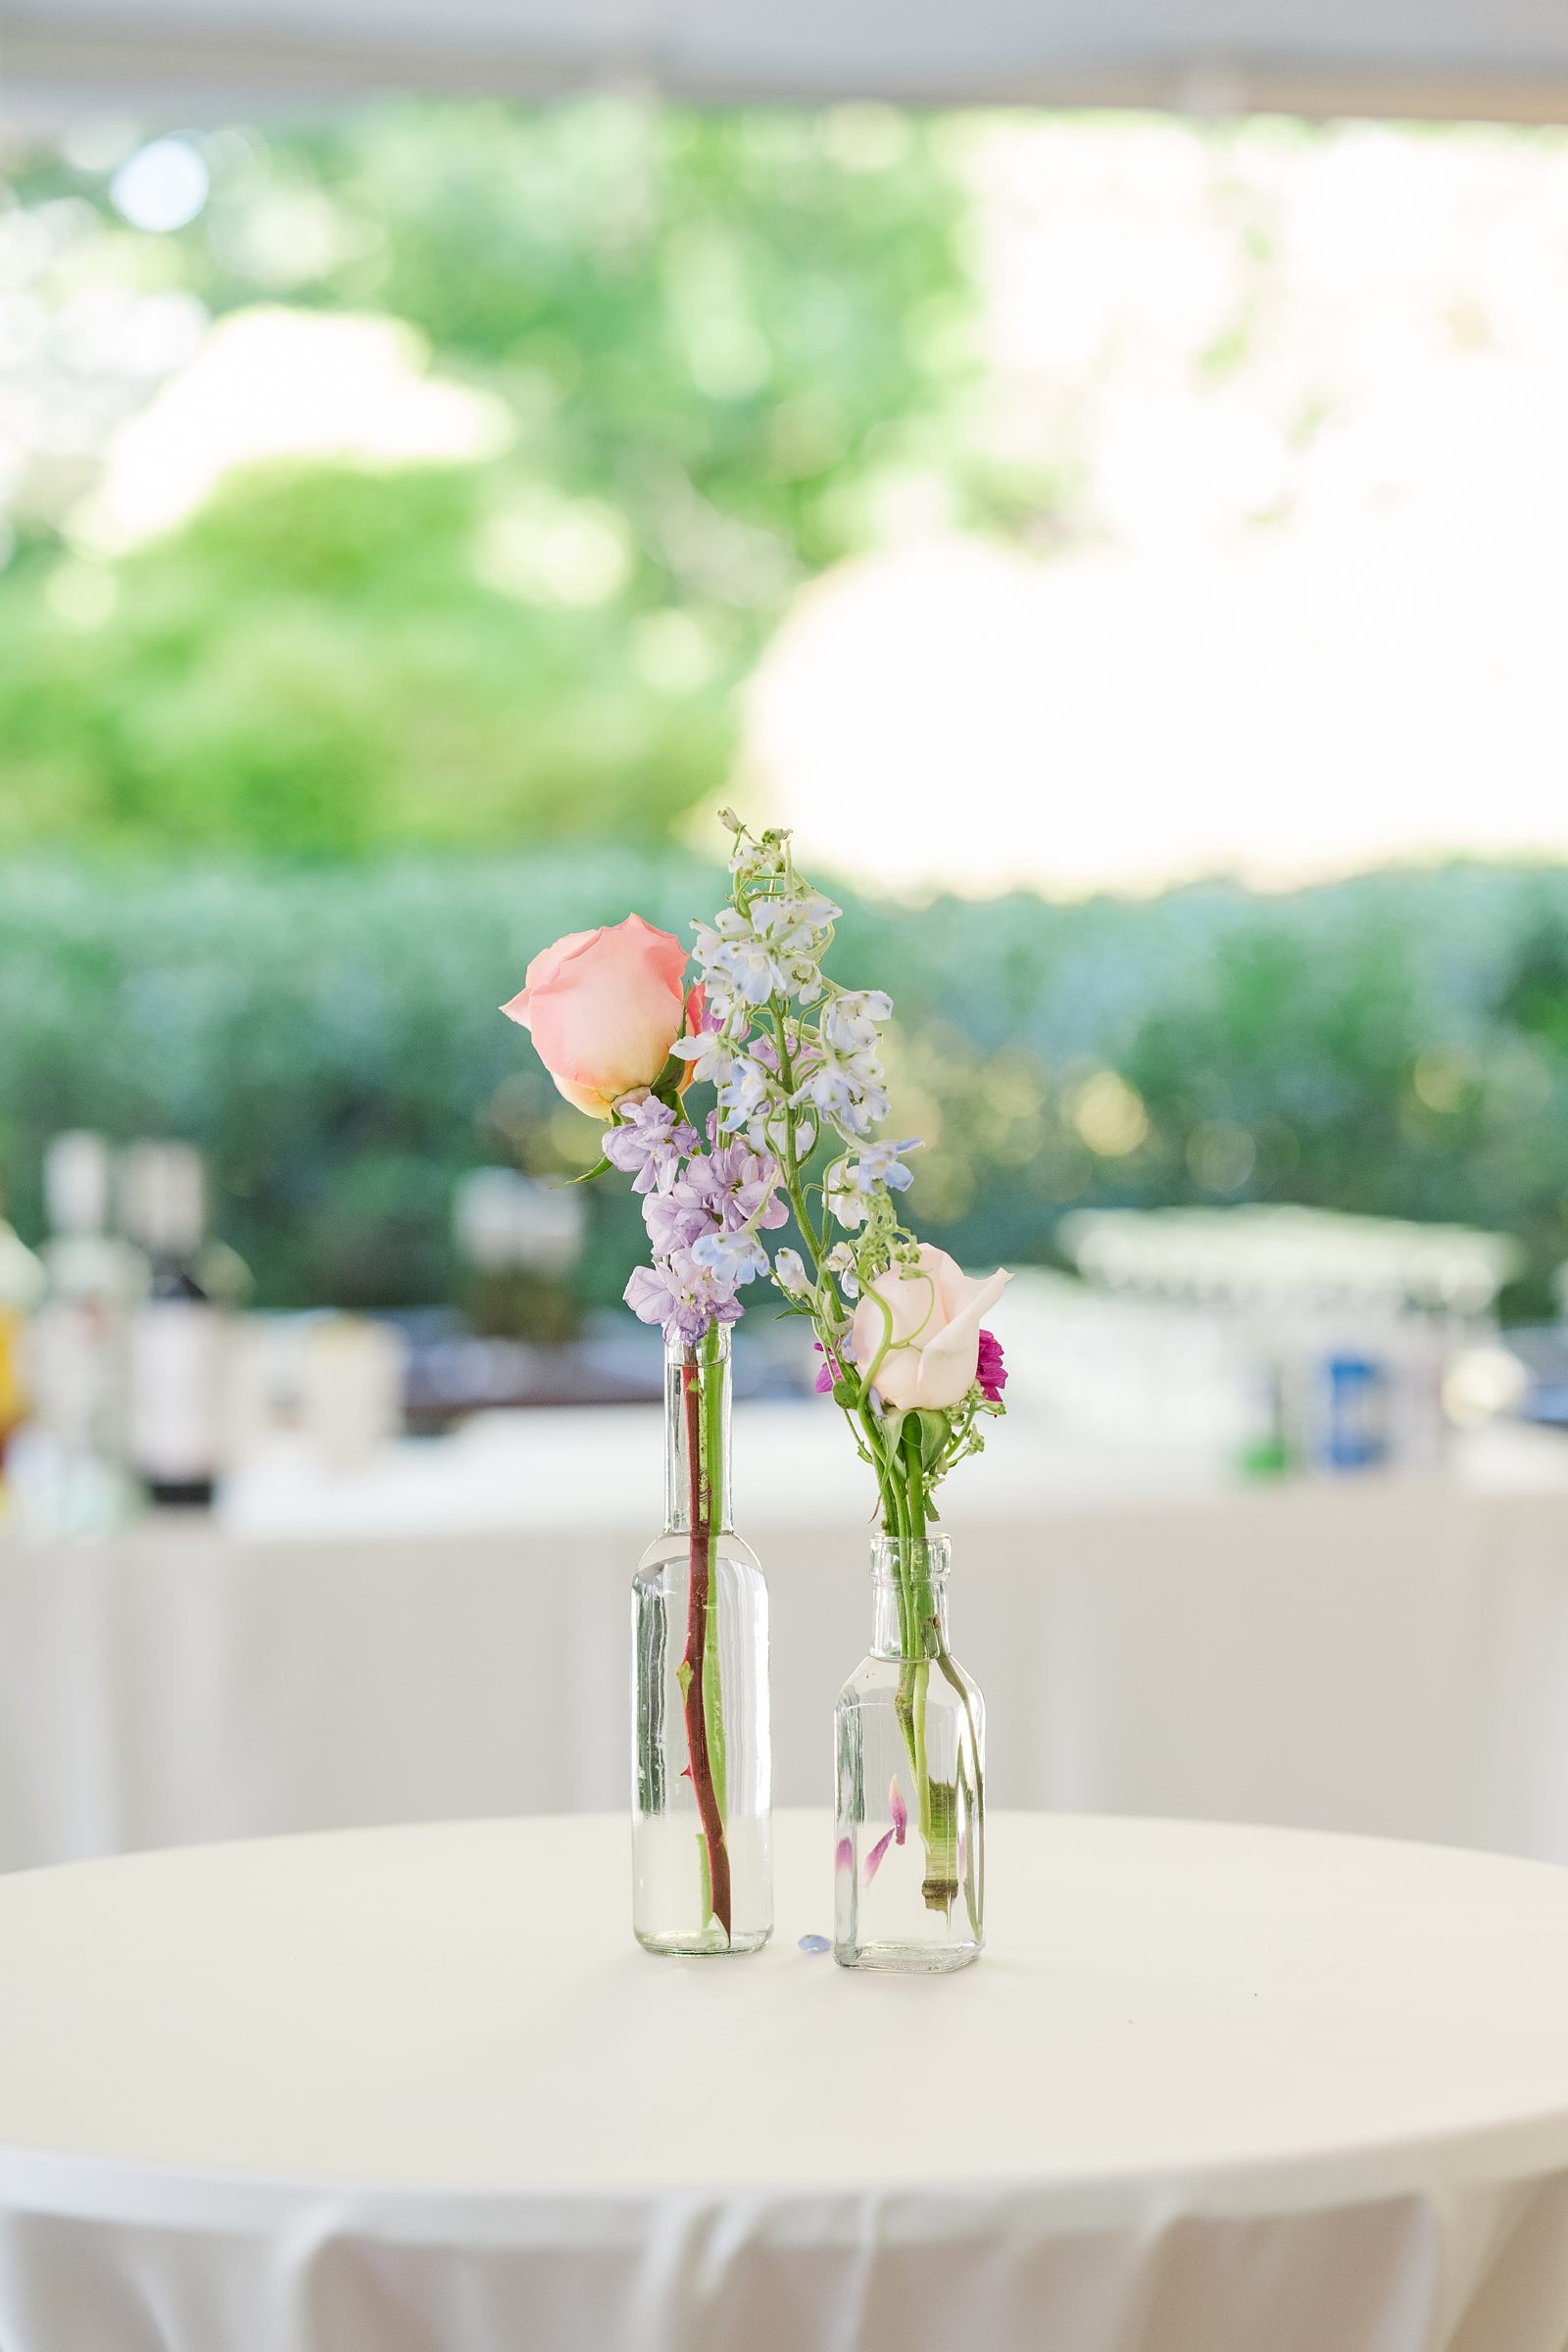 Colorful Reception Decor at Fall Lewis Ginter Wedding Reception